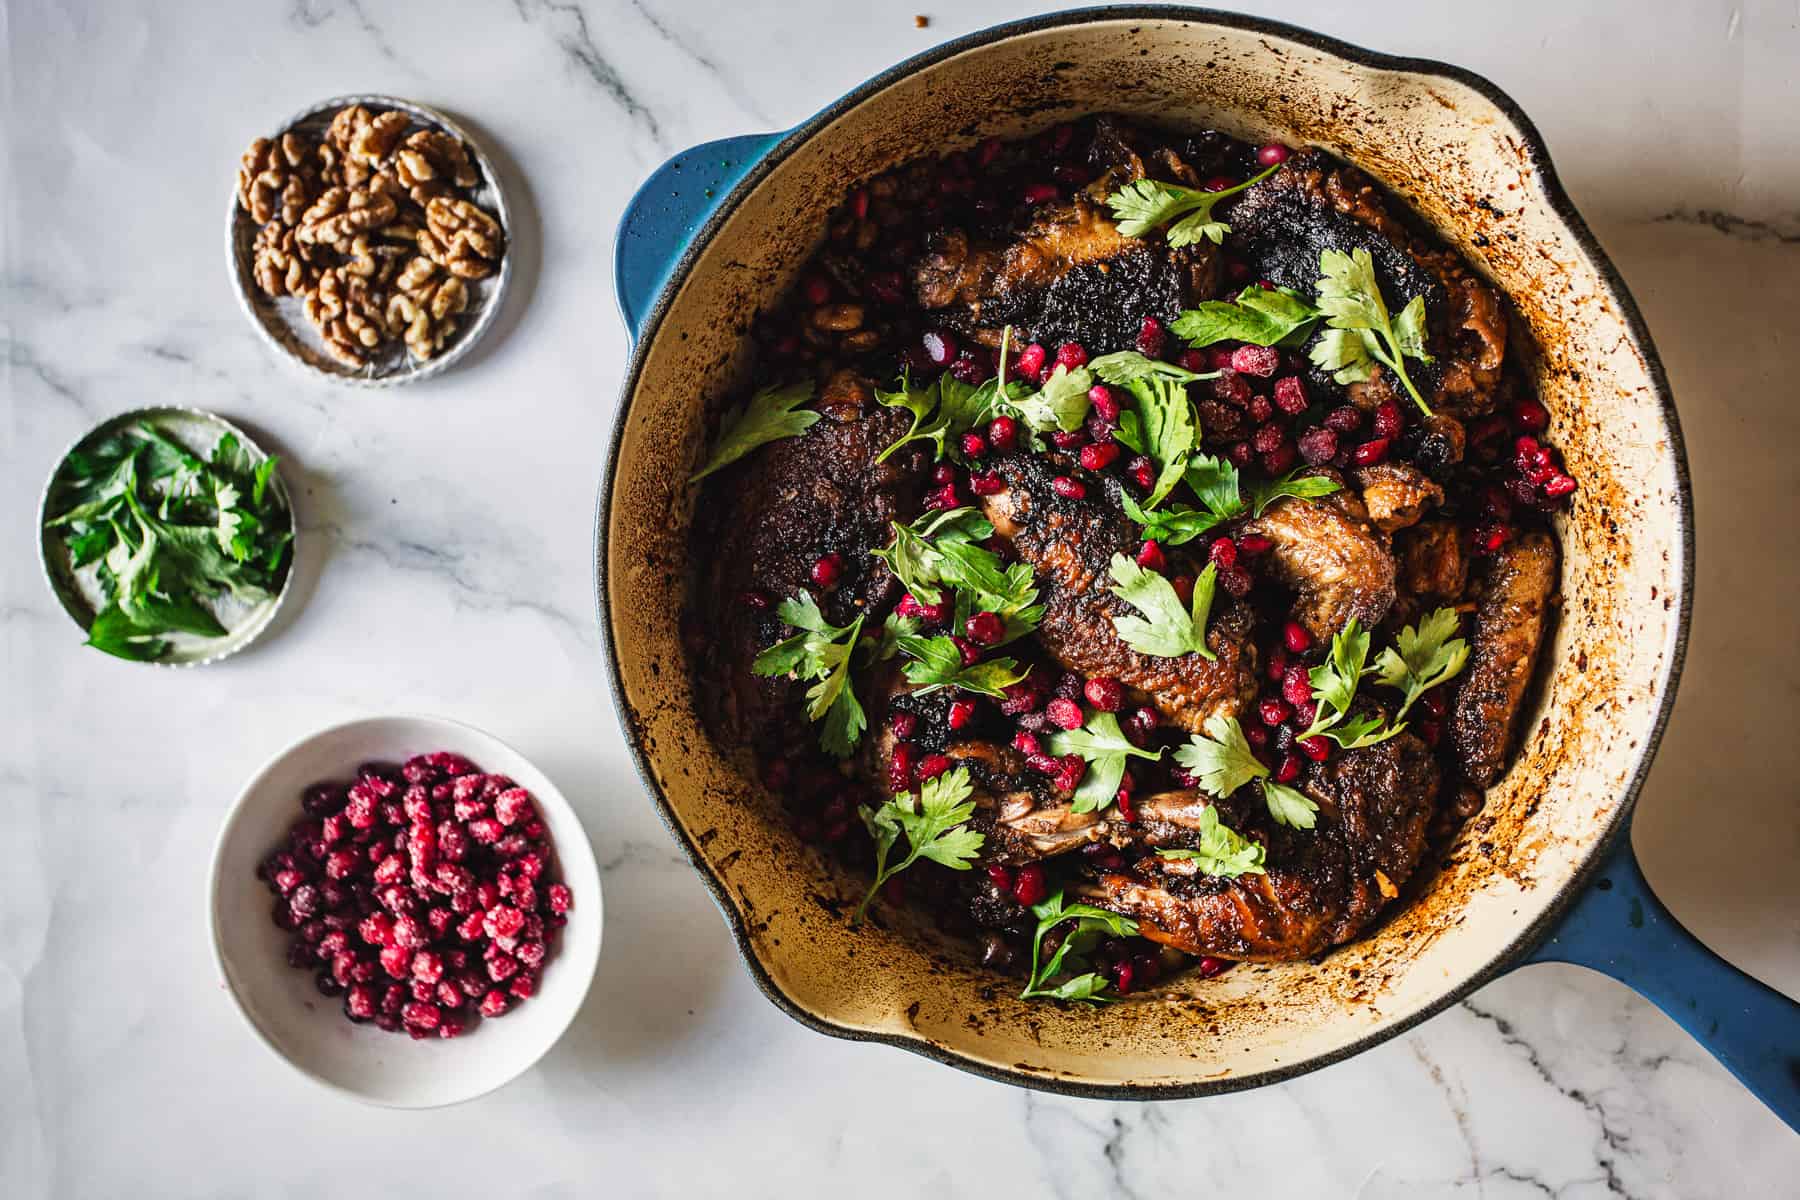 Roasted chicken with pomegranate and pomegranate seeds.